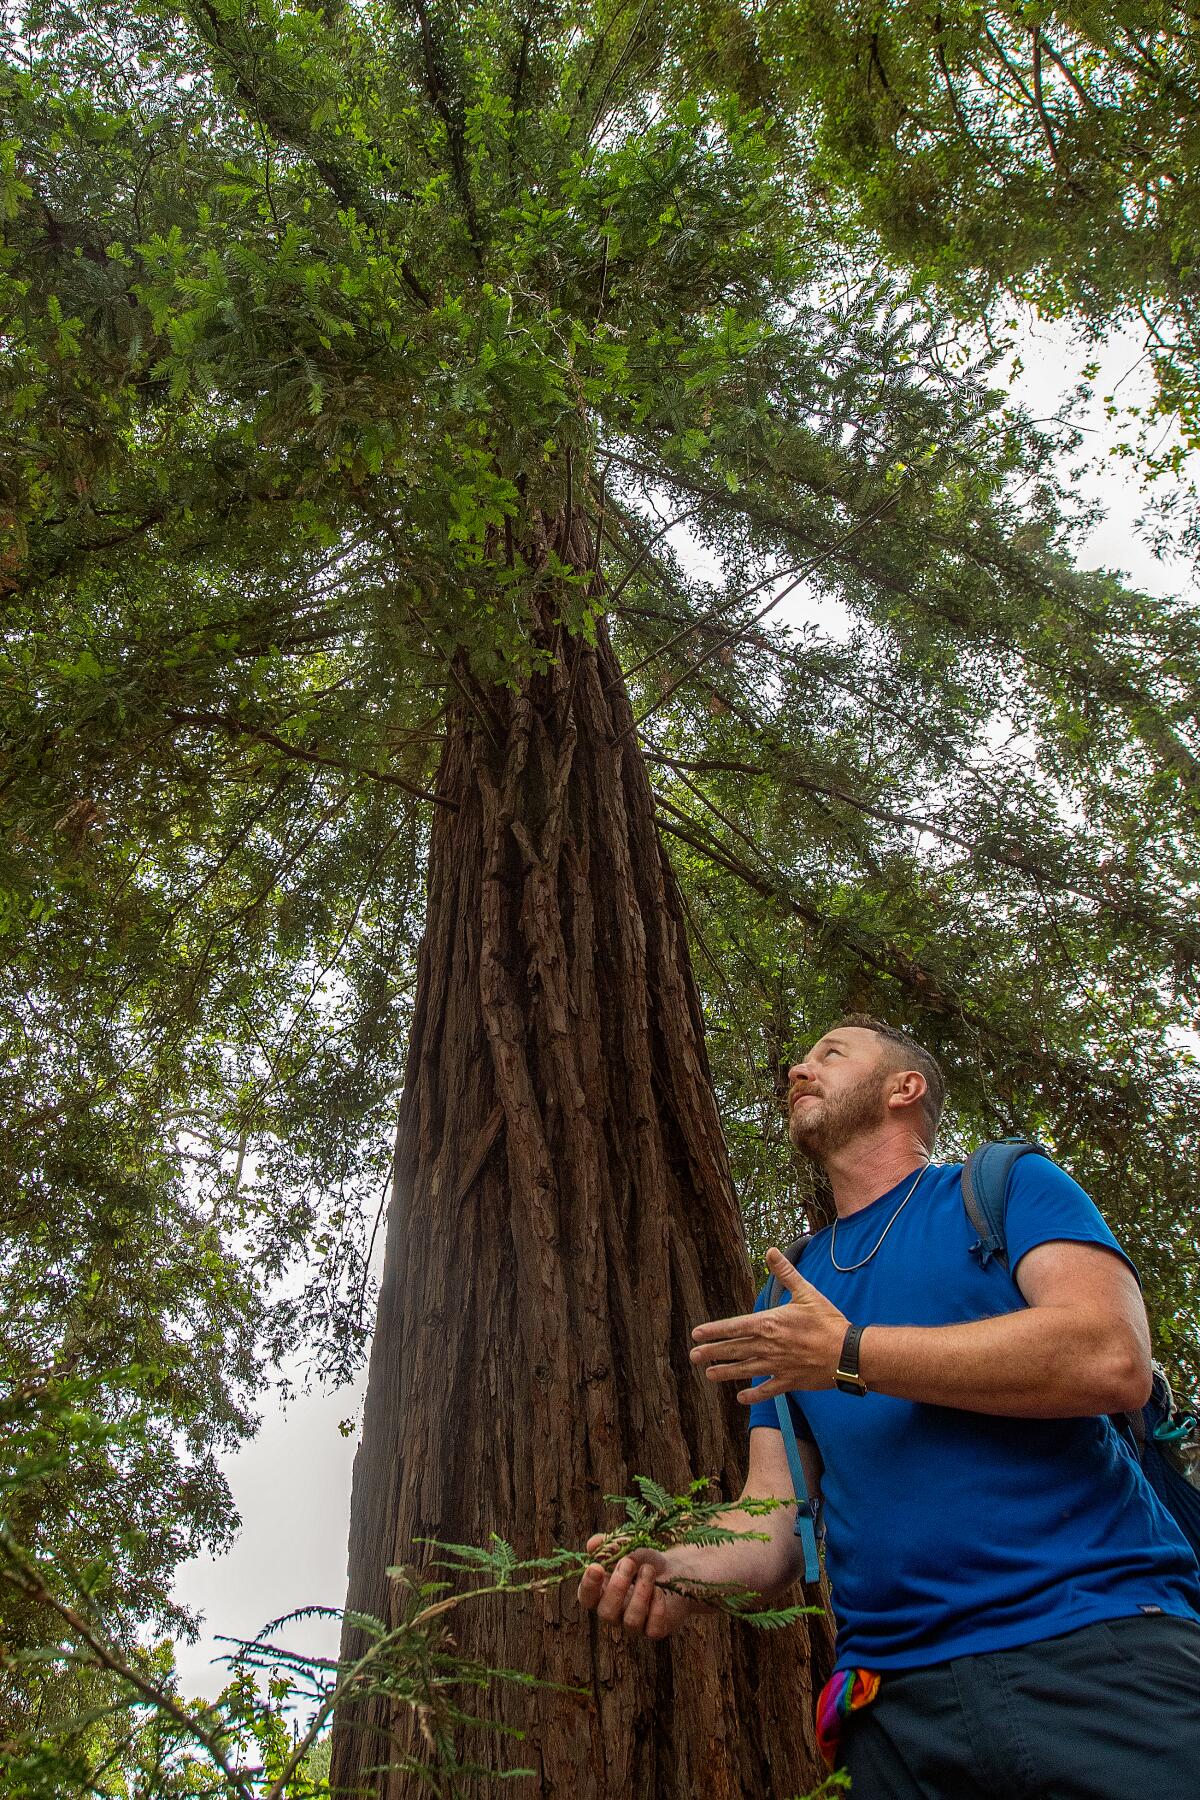 A man looks up at the tall, spreading branches of the redwood tree looming above him.